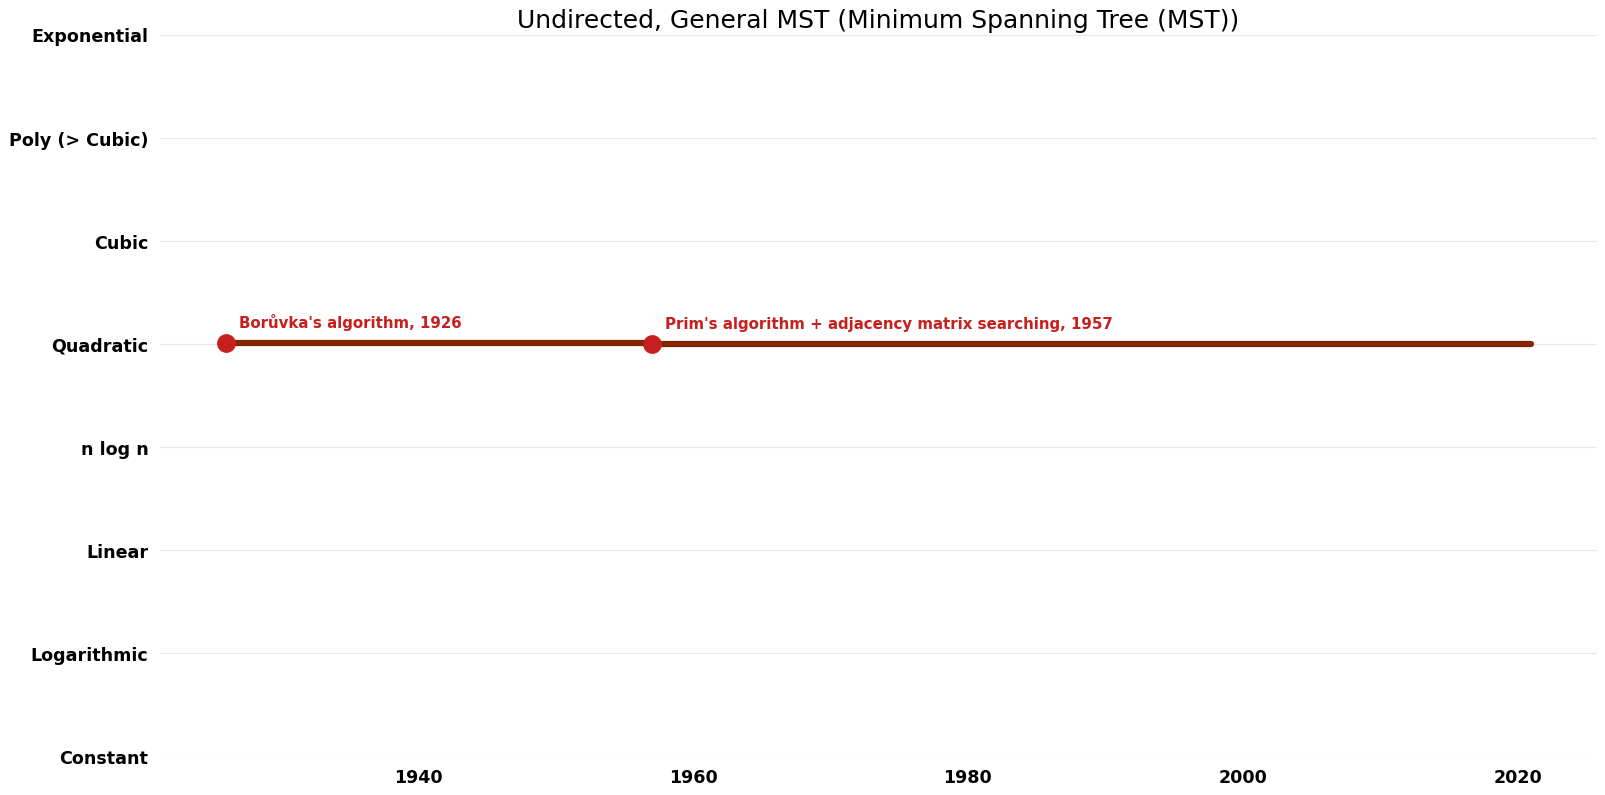 Minimum Spanning Tree (MST) - Undirected, General MST - Time.png